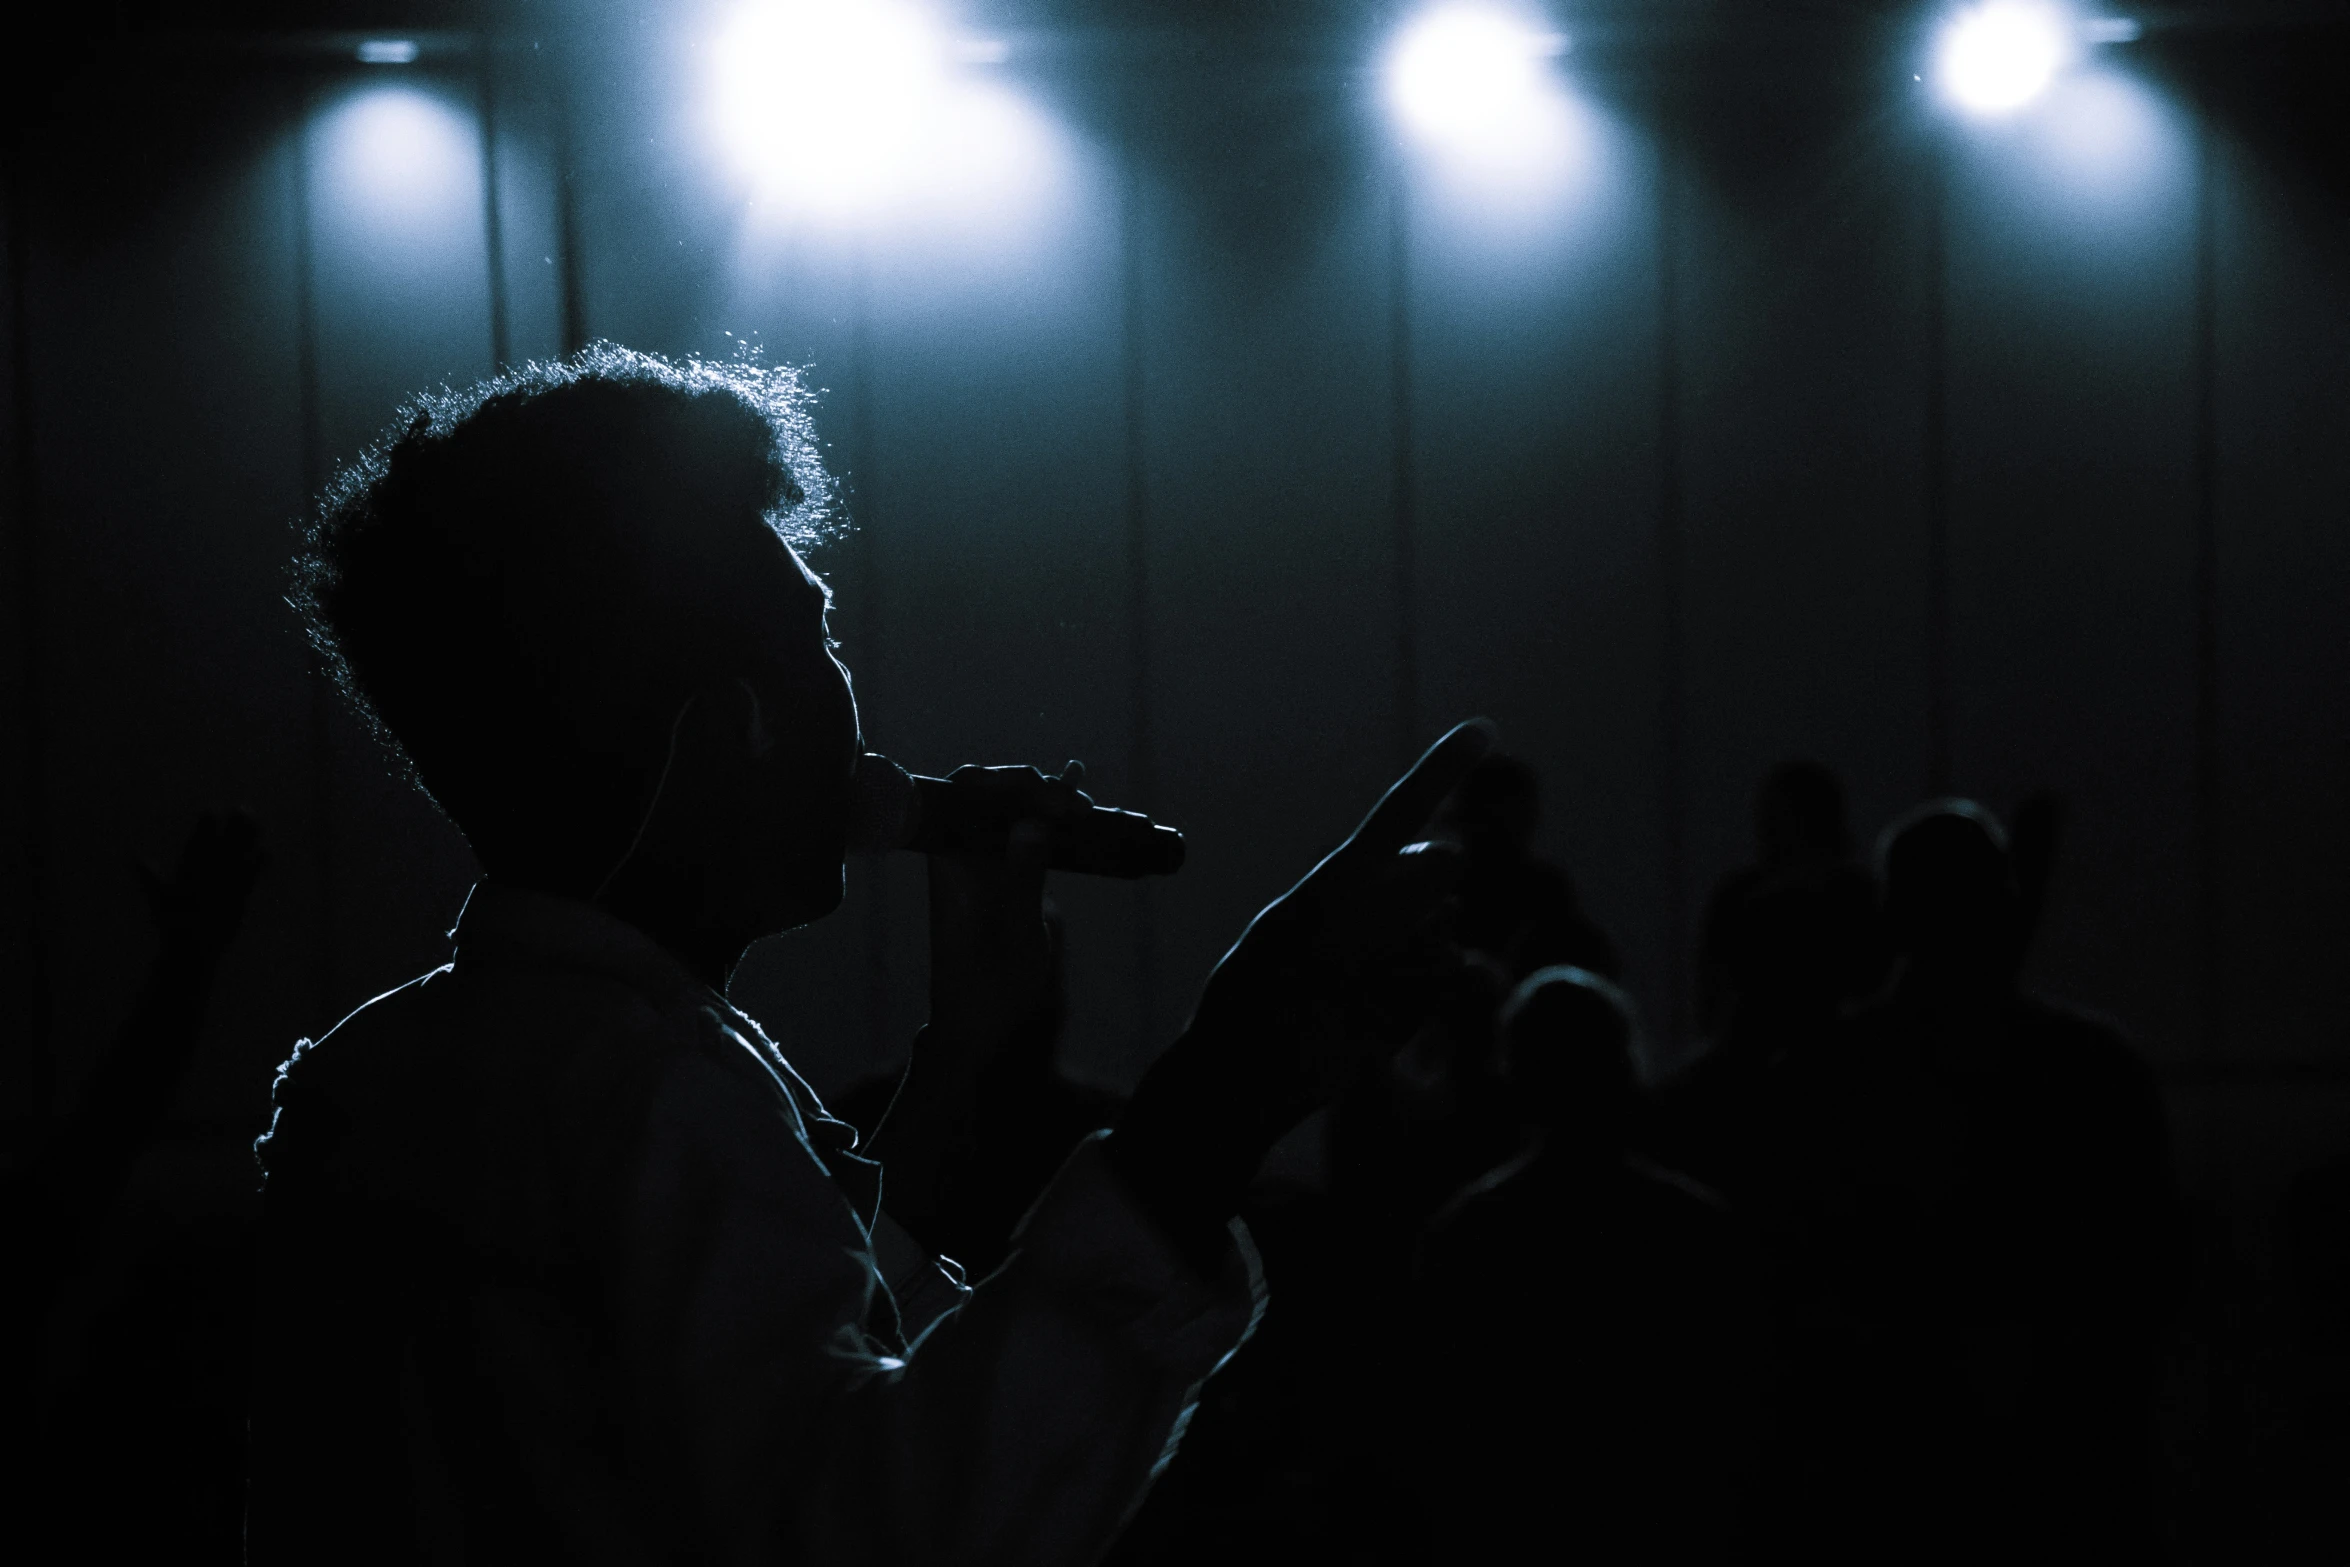 the silhouette of an adult and audience in front of a microphone on stage